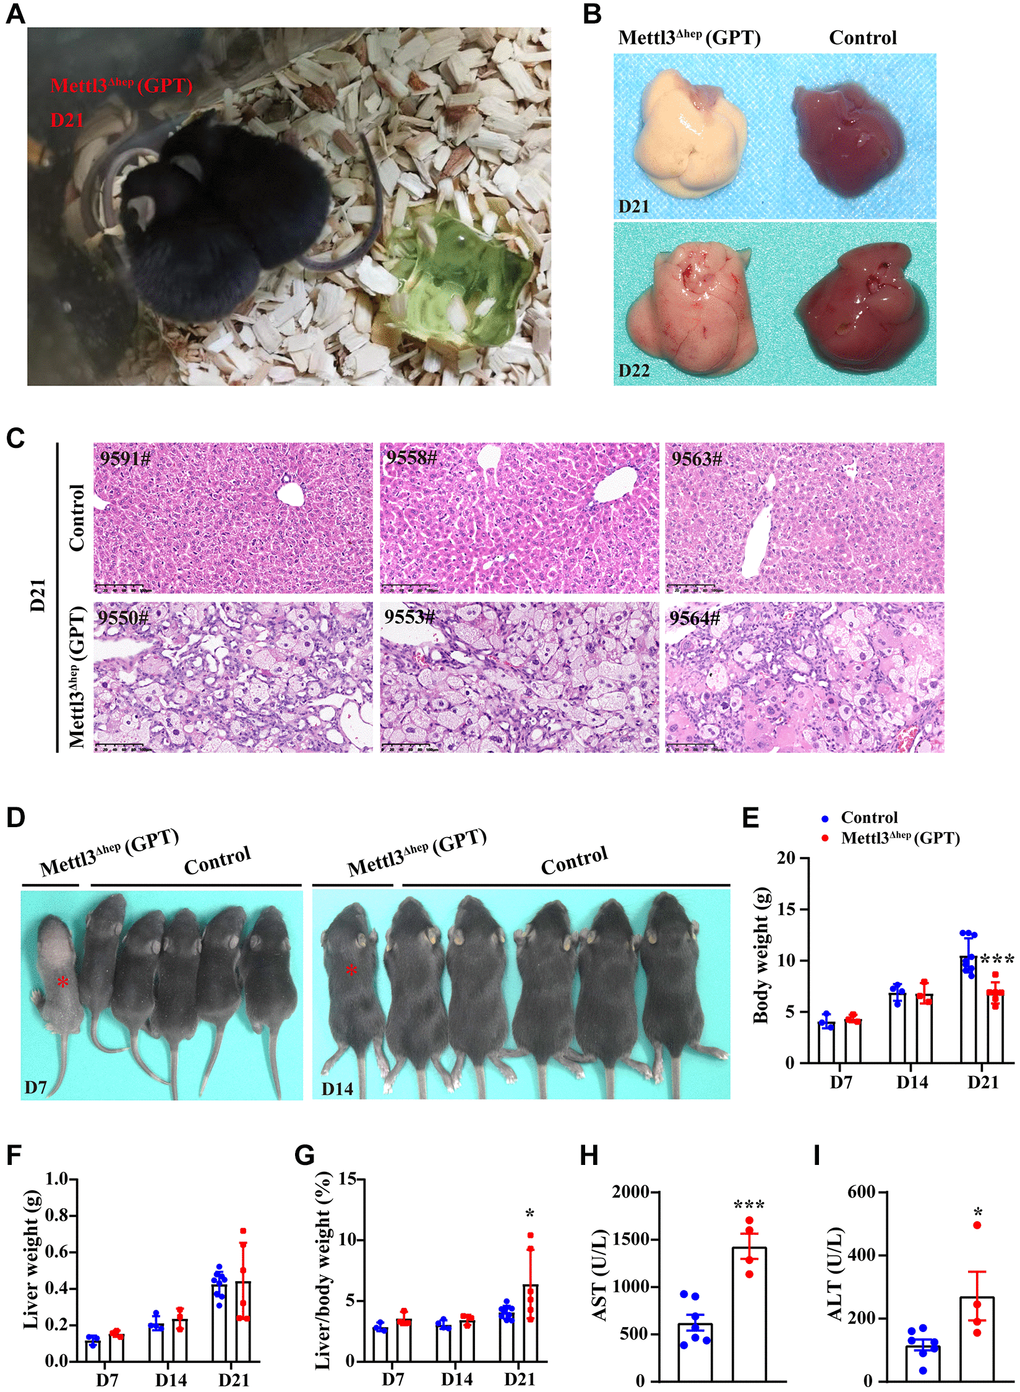 Homozygous deletion of METTL3 in murine hepatocytes by Alb-iCre mice (GPT) results in liver injury and acute liver failure (ALF). (A) Representative appearance of METTL3Δhep mice (GPT) at 21 days after birth. (B) Representative gross appearance of livers from control mice and METTL3Δhep mice (GPT) at 21 or 22 days postnatally. (C) Representative H&E staining photographs of liver sections from control mice and METTL3Δhep mice (GPT) at 21 days postnatally. Scale bar = 100 μm. (D) Representative appearance of control mice and METTL3Δhep mice (GPT) at 7 or 14 days after birth. (E–G) Body weight (E), liver weight (F) and liver-to-body weight ratio (G) of control mice and METTL3Δhep mice (GPT) at 7, 14 or 21 days after birth. (H, I) Serum levels of AST (H) and ALT (I) of control mice and METTL3Δhep mice (GPT).